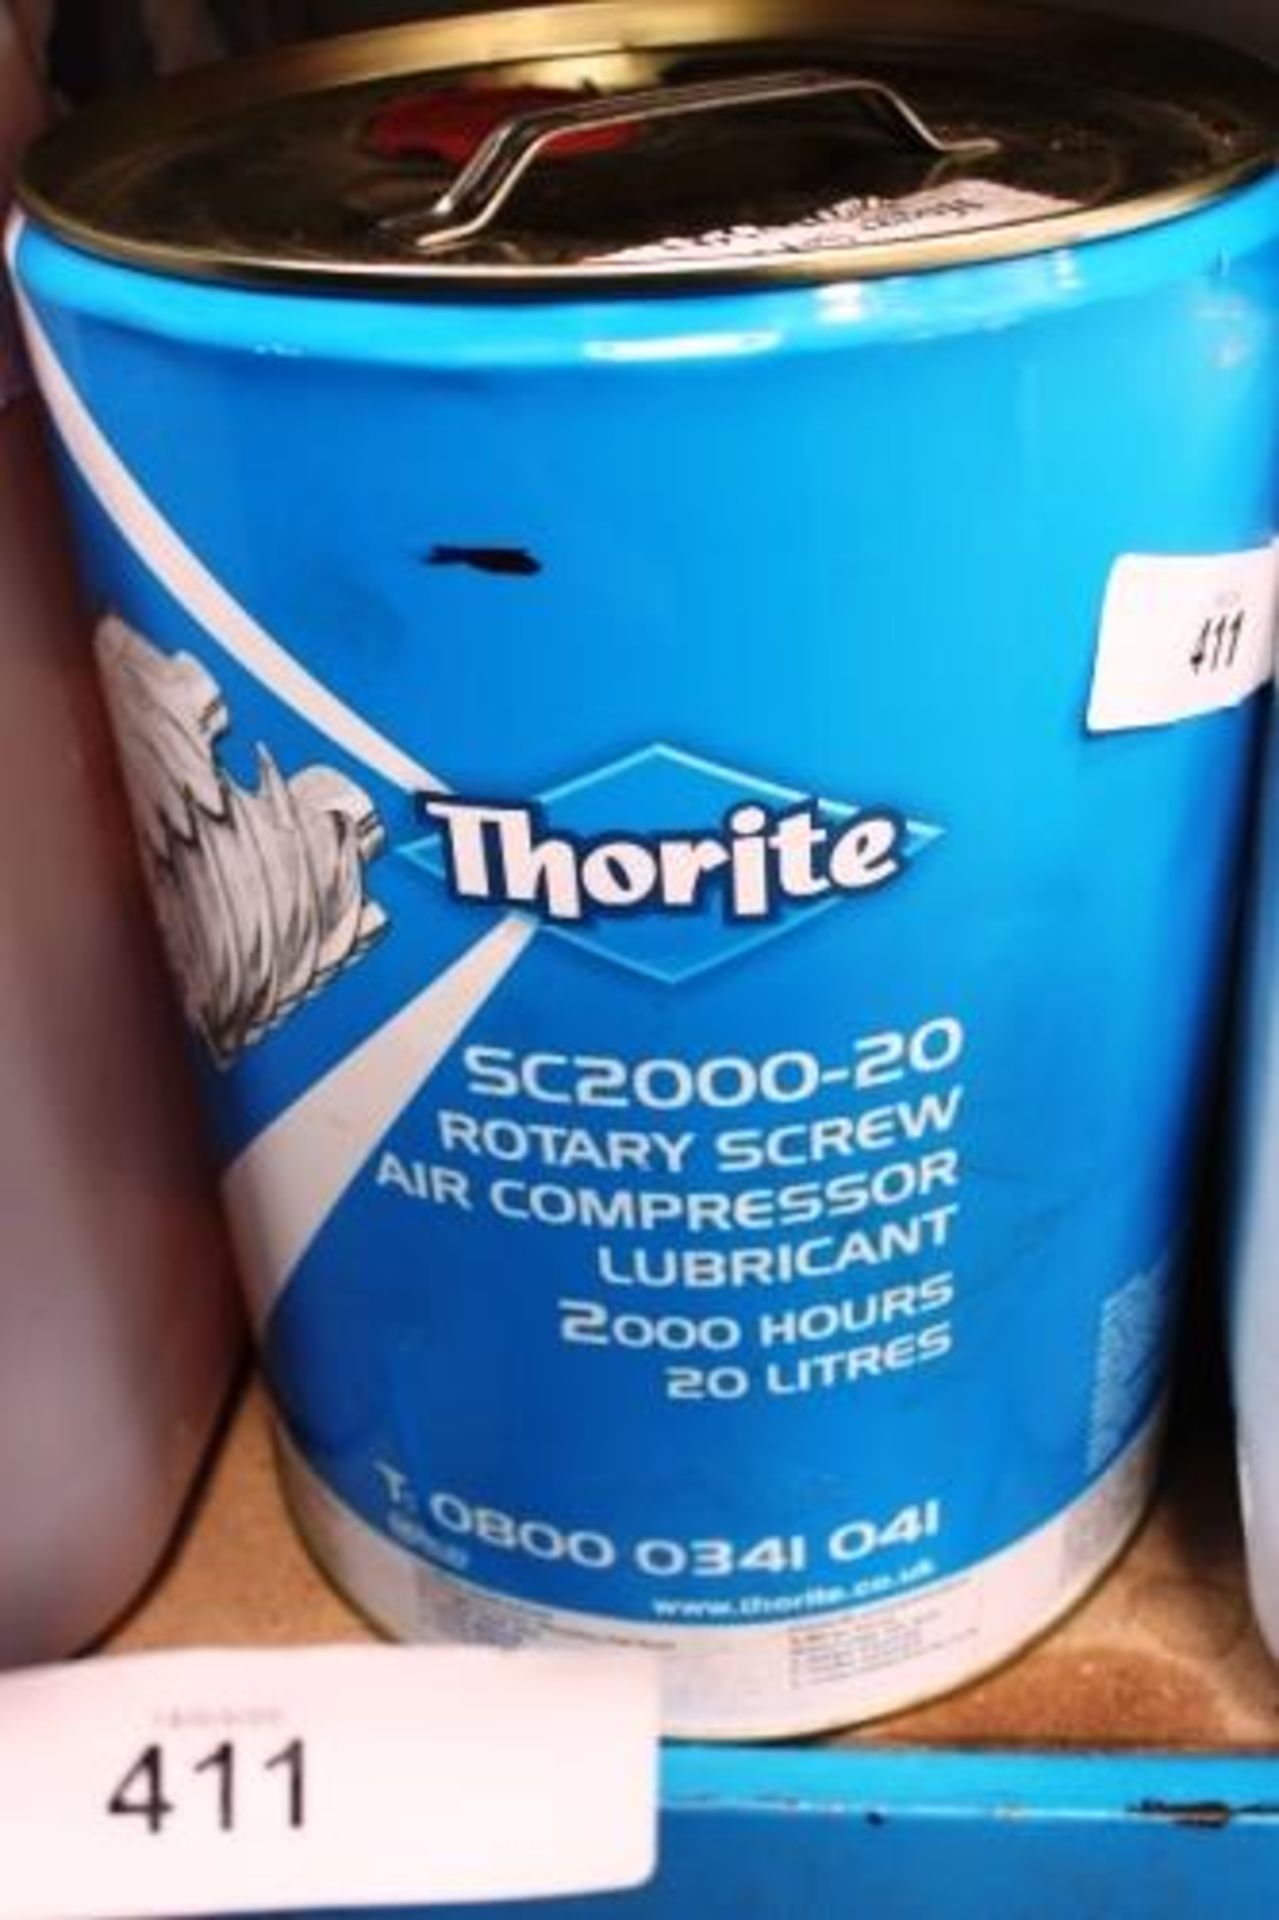 1 x 20ltr tin of Thorite SC2000-20 rotary screw air compressor lubricant - Sealed new (GS11)